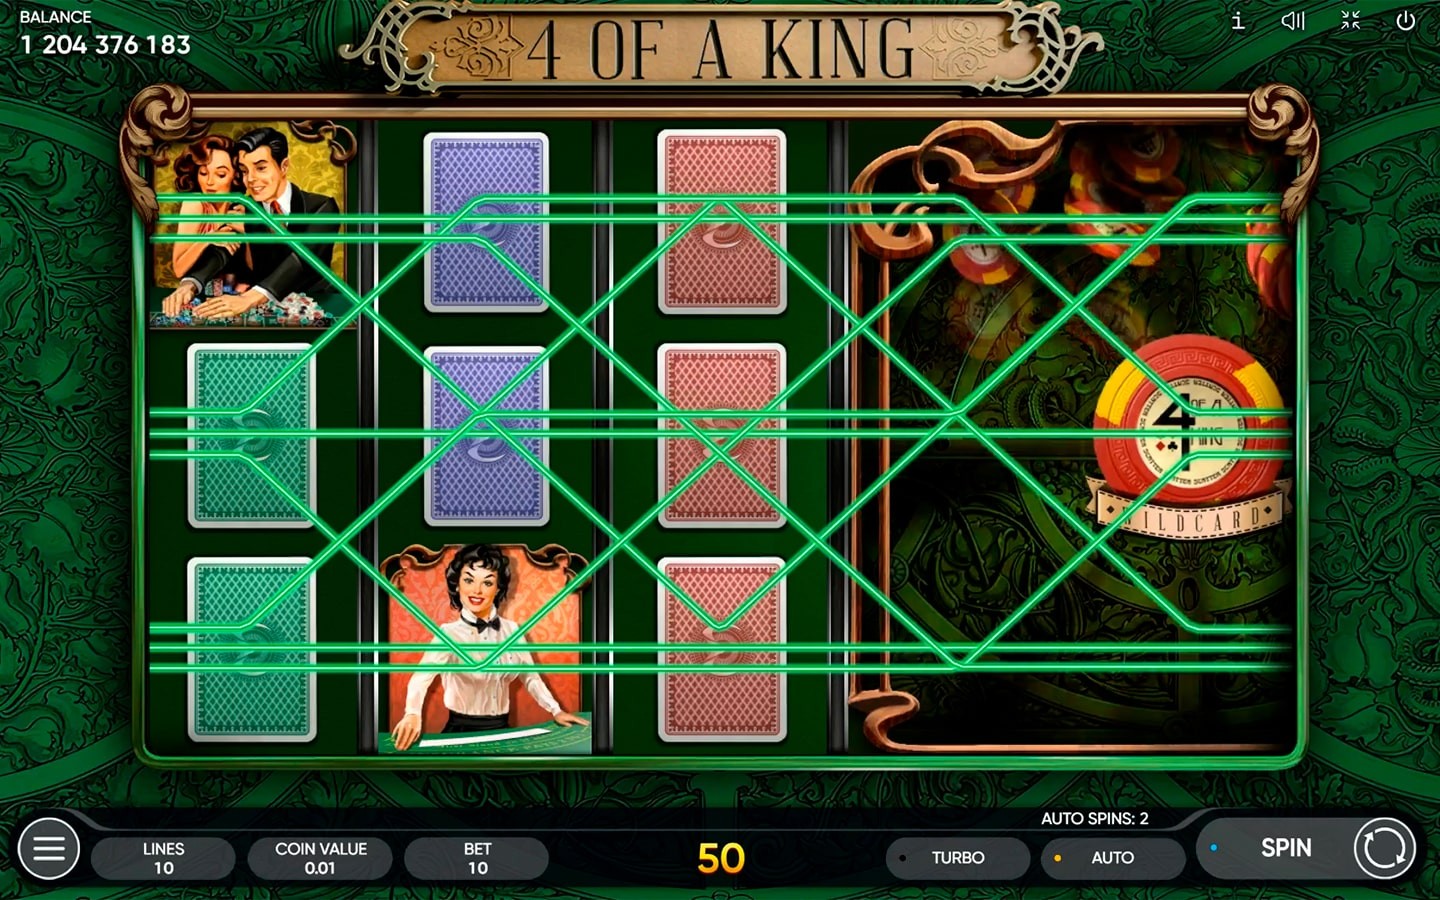 POPULAR CLASSIC SLOTS - Try 4 OF A KING slot now!